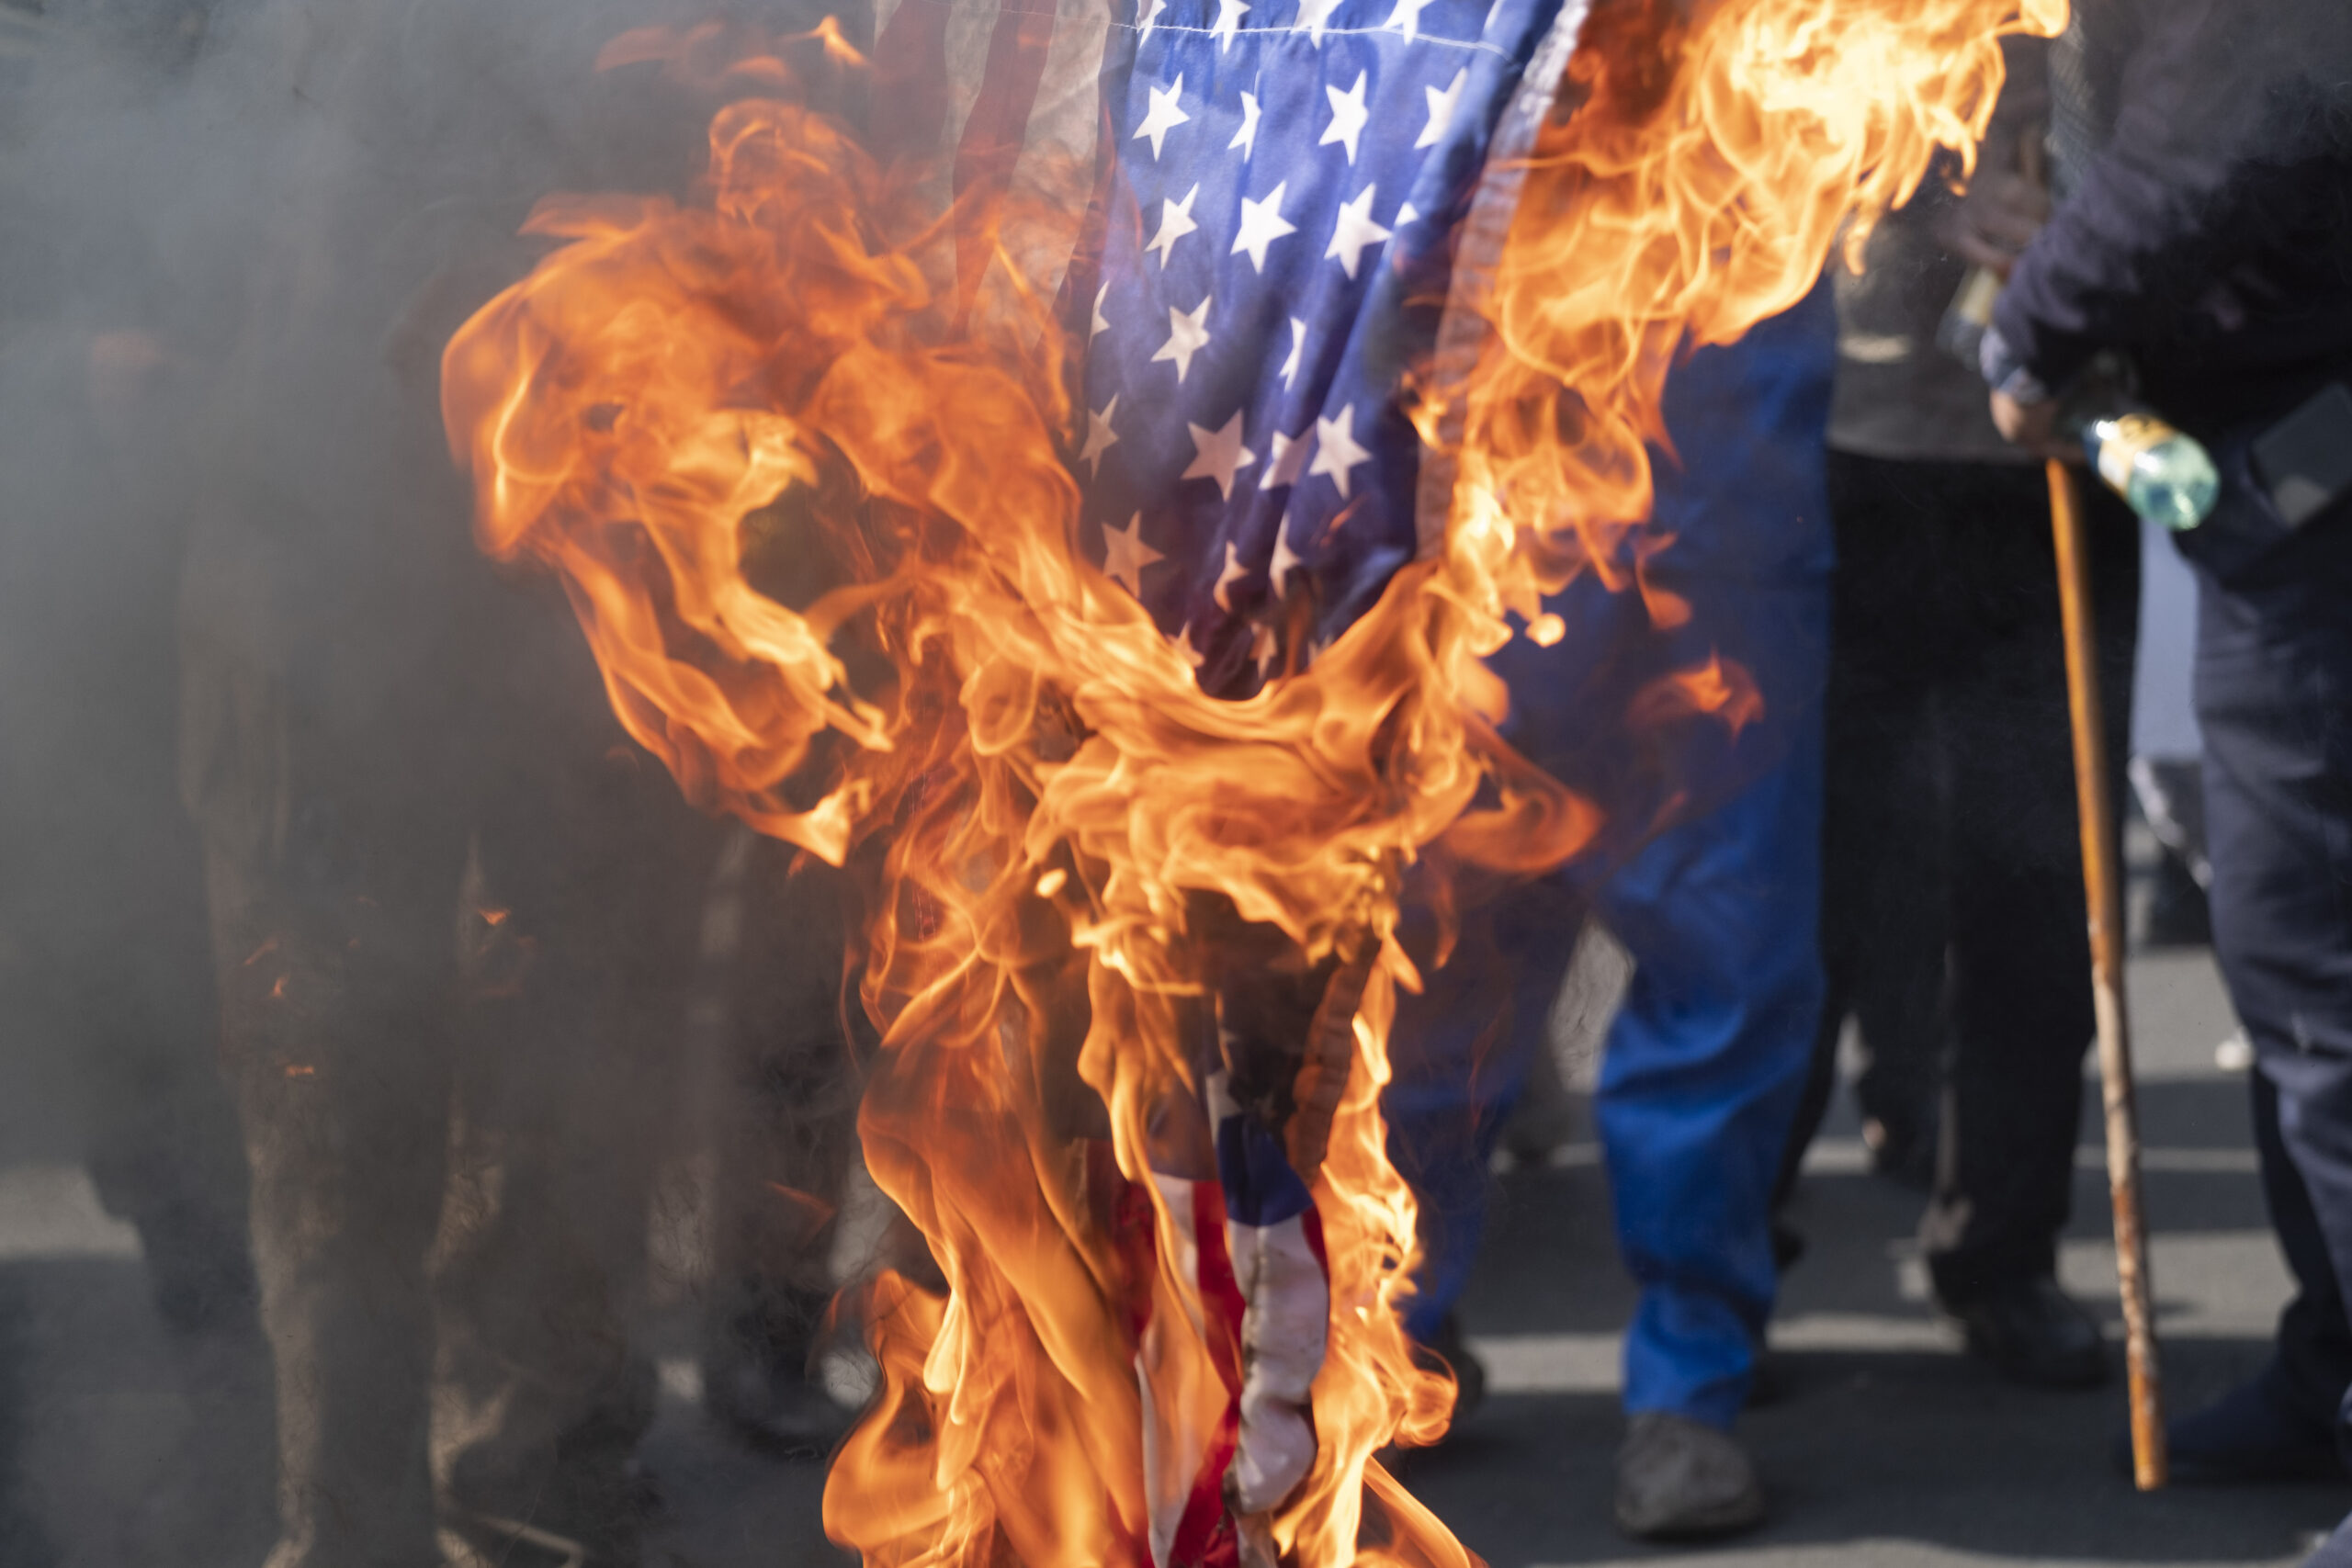 Those $%*#@# guys. Why can't we all unite around this common enemy instead of fighting each other politically at home? <em>Iranian protesters burn the U.S. flag during an anti-Israel rally protesting the Israeli air strike on Al-Ahli hospital, in northern Tehran, October 20, 2023. Israel's military denied responsibility for the Gaza hospital attack, attributing it to a failed rocket launch by the Palestinian Islamic Jihad group. MORTEZA NIKOUBAZL/NurPhoto (Photo by Morteza Nikoubazl/NurPhoto via Getty Images)</em>